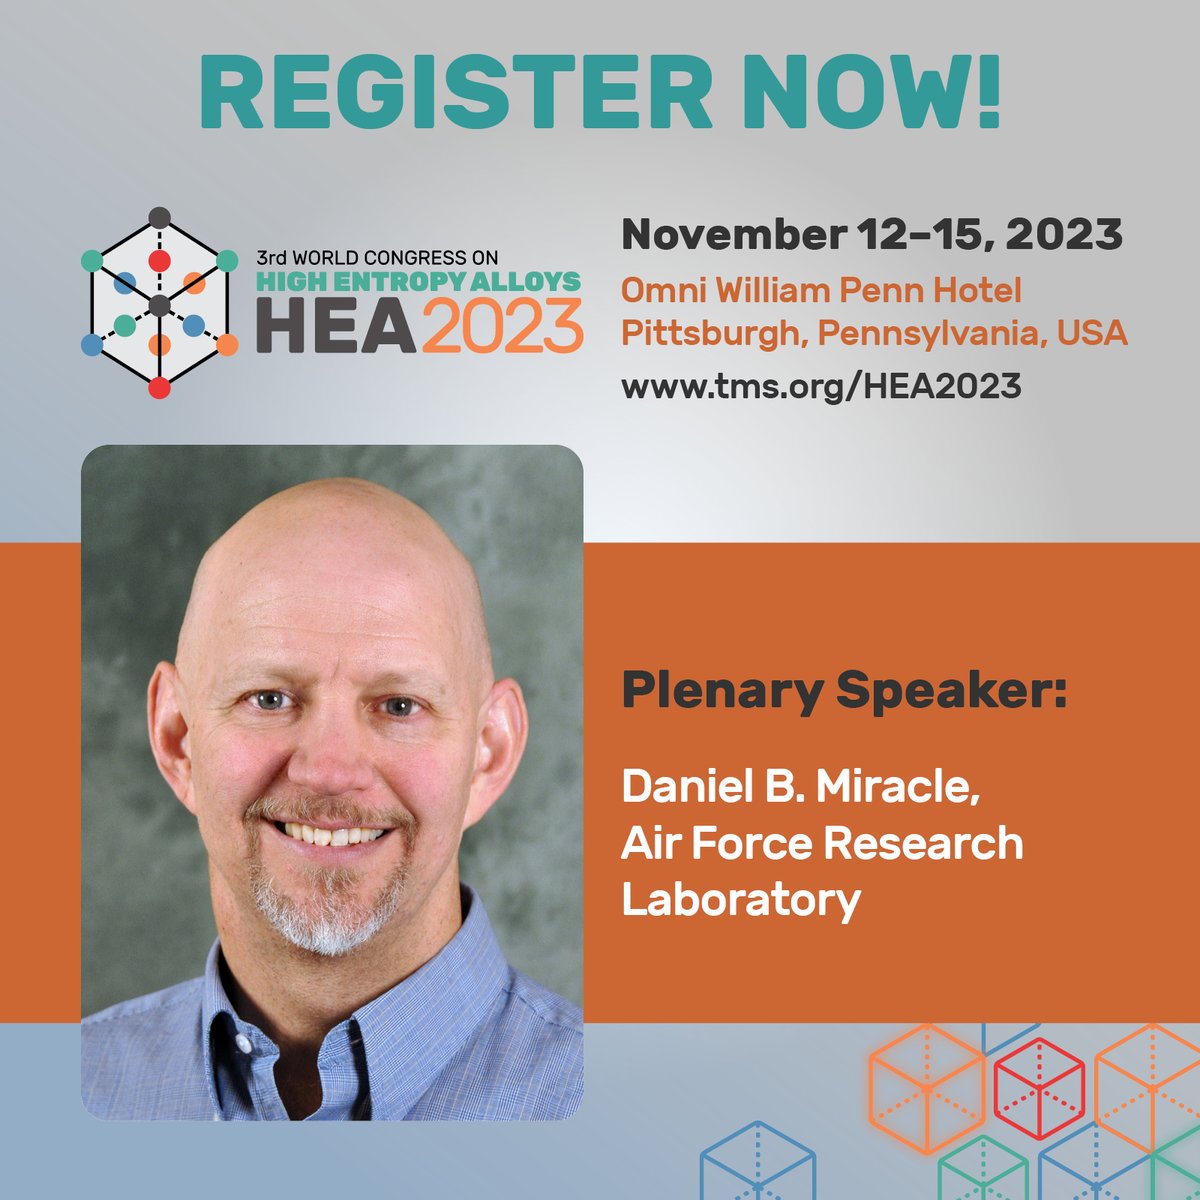 Register today to hear from Dan Miracle of the Air Force Research Lab at the 3rd World Congress of High Entropy Alloys. Learn more about the event and register today at #HEA2023 at ow.ly/46sa50PXPJg